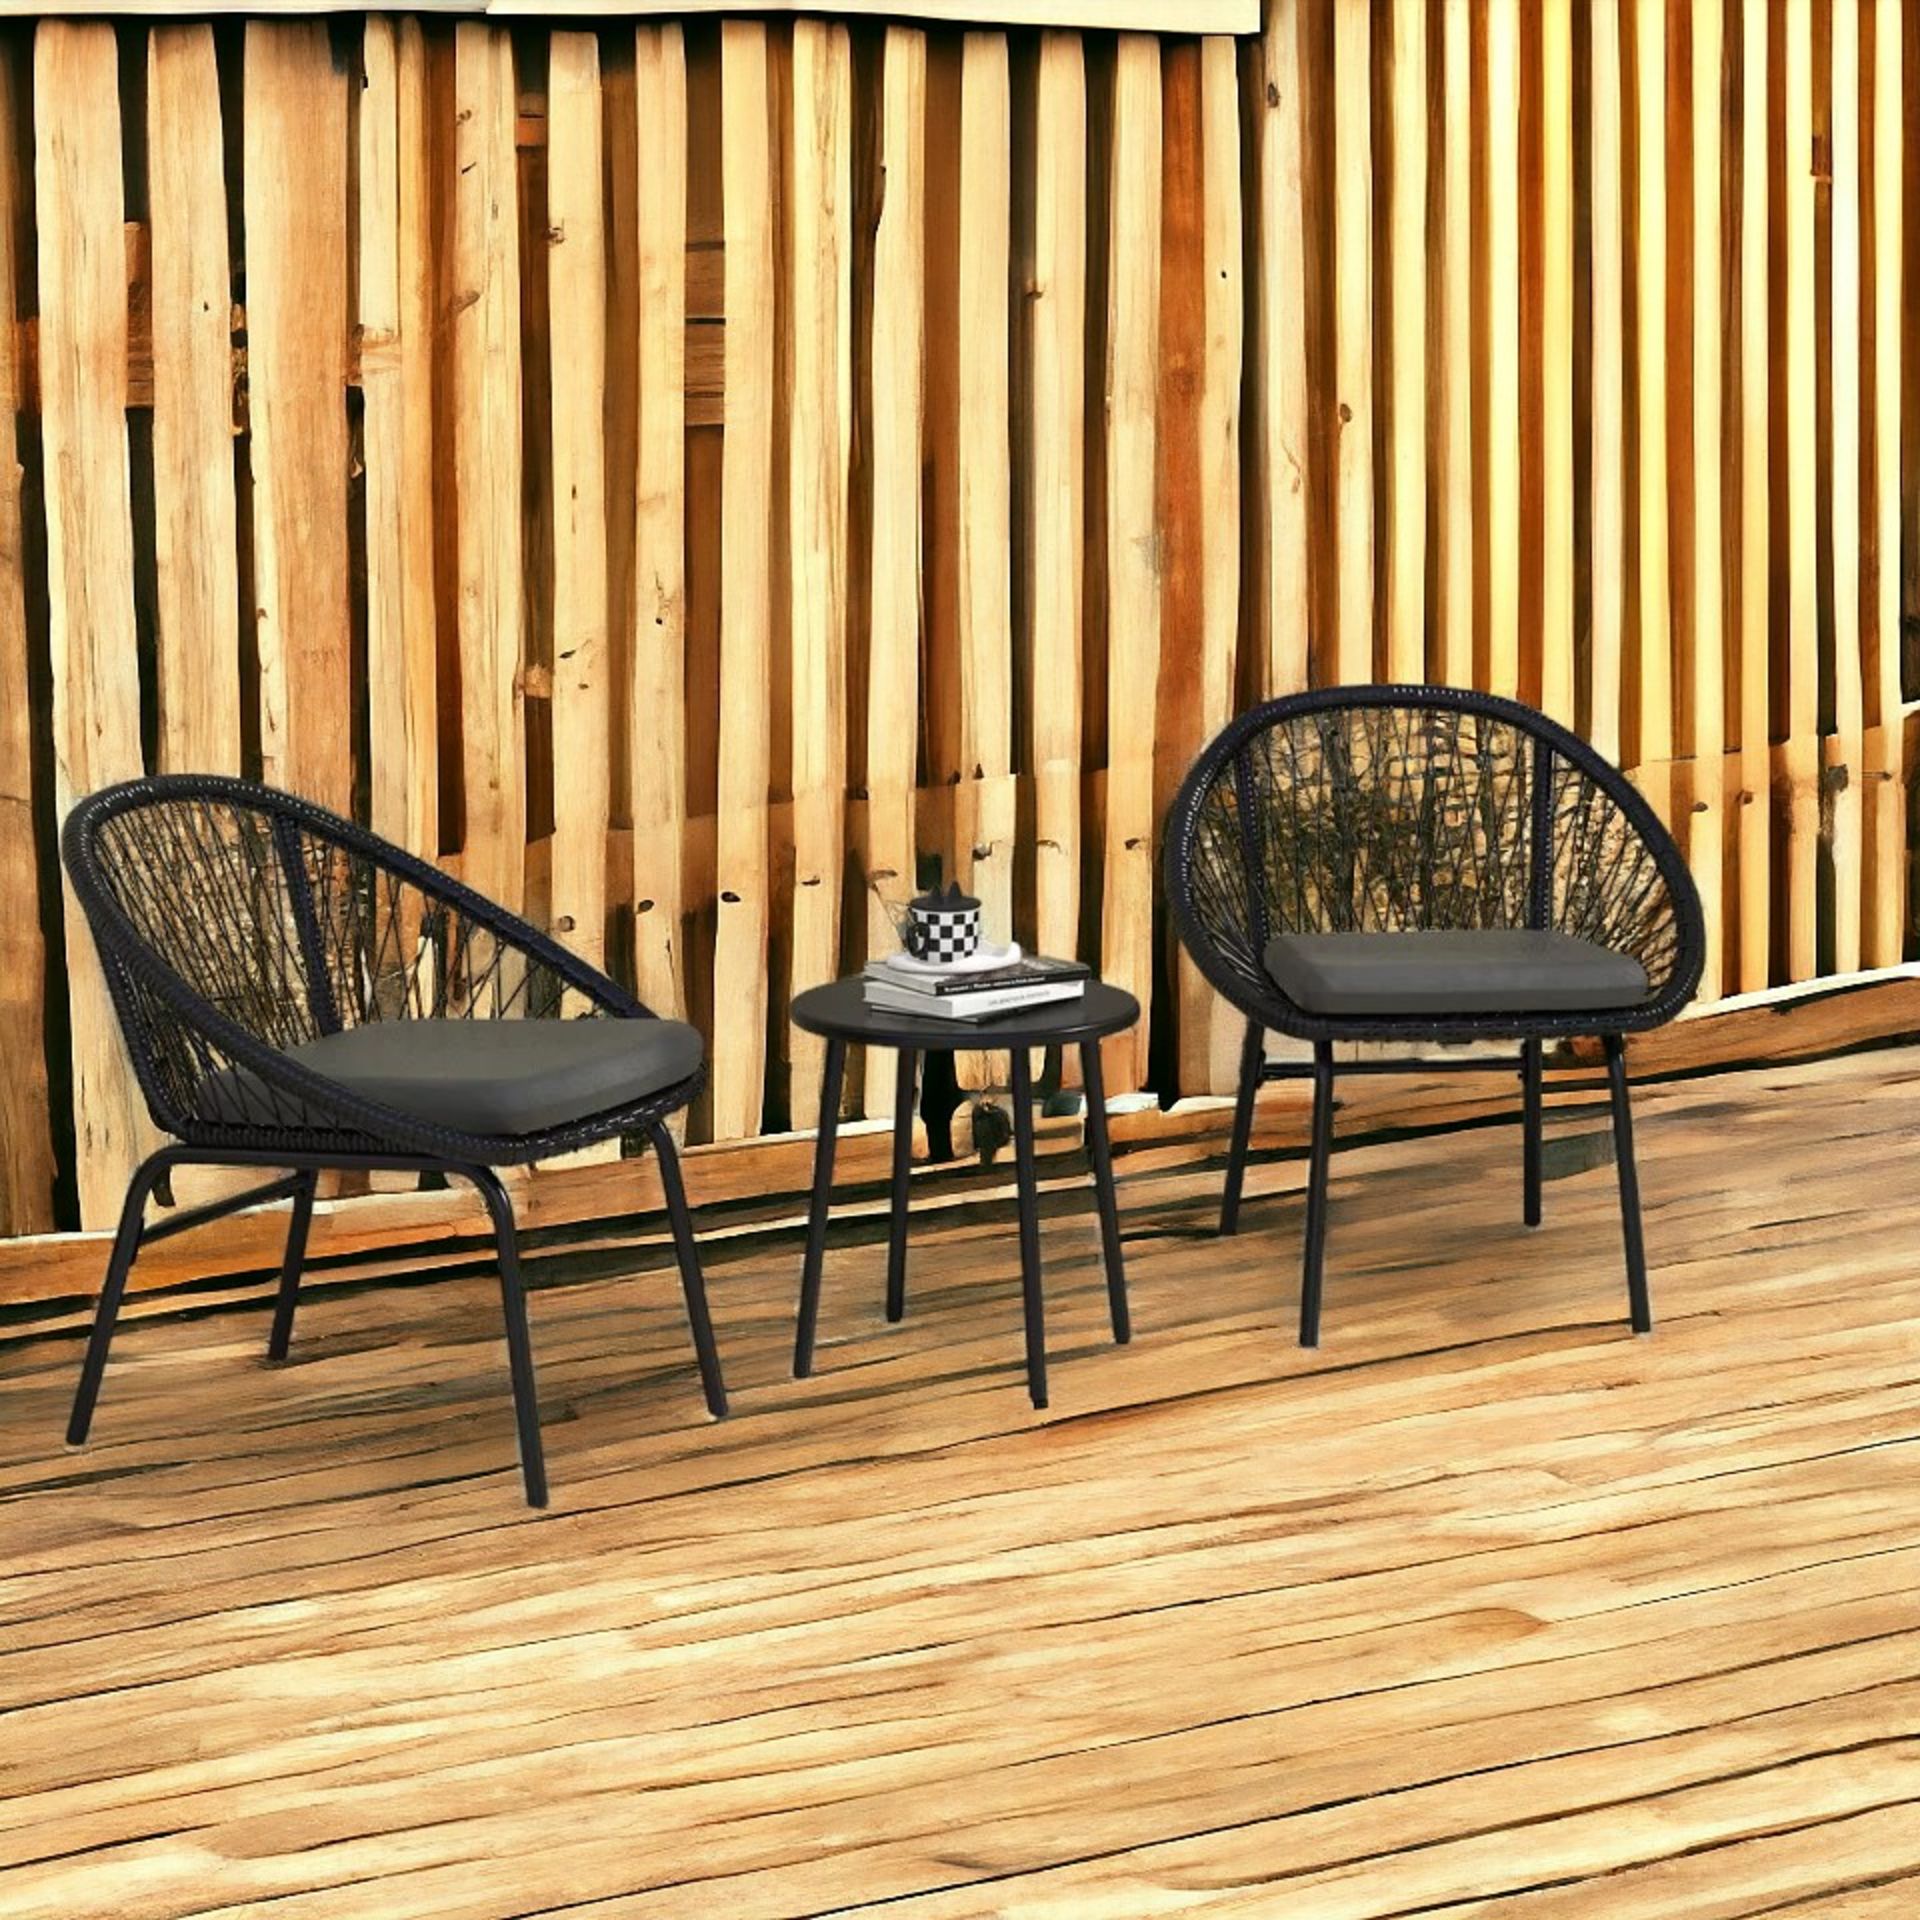 FREE DELIVERY- BRAND NEW 3 PIECE GARDEN FURNITURE SET, BISTRO SET W/ 2 CHAIRS & 1 COFFEE TABLE